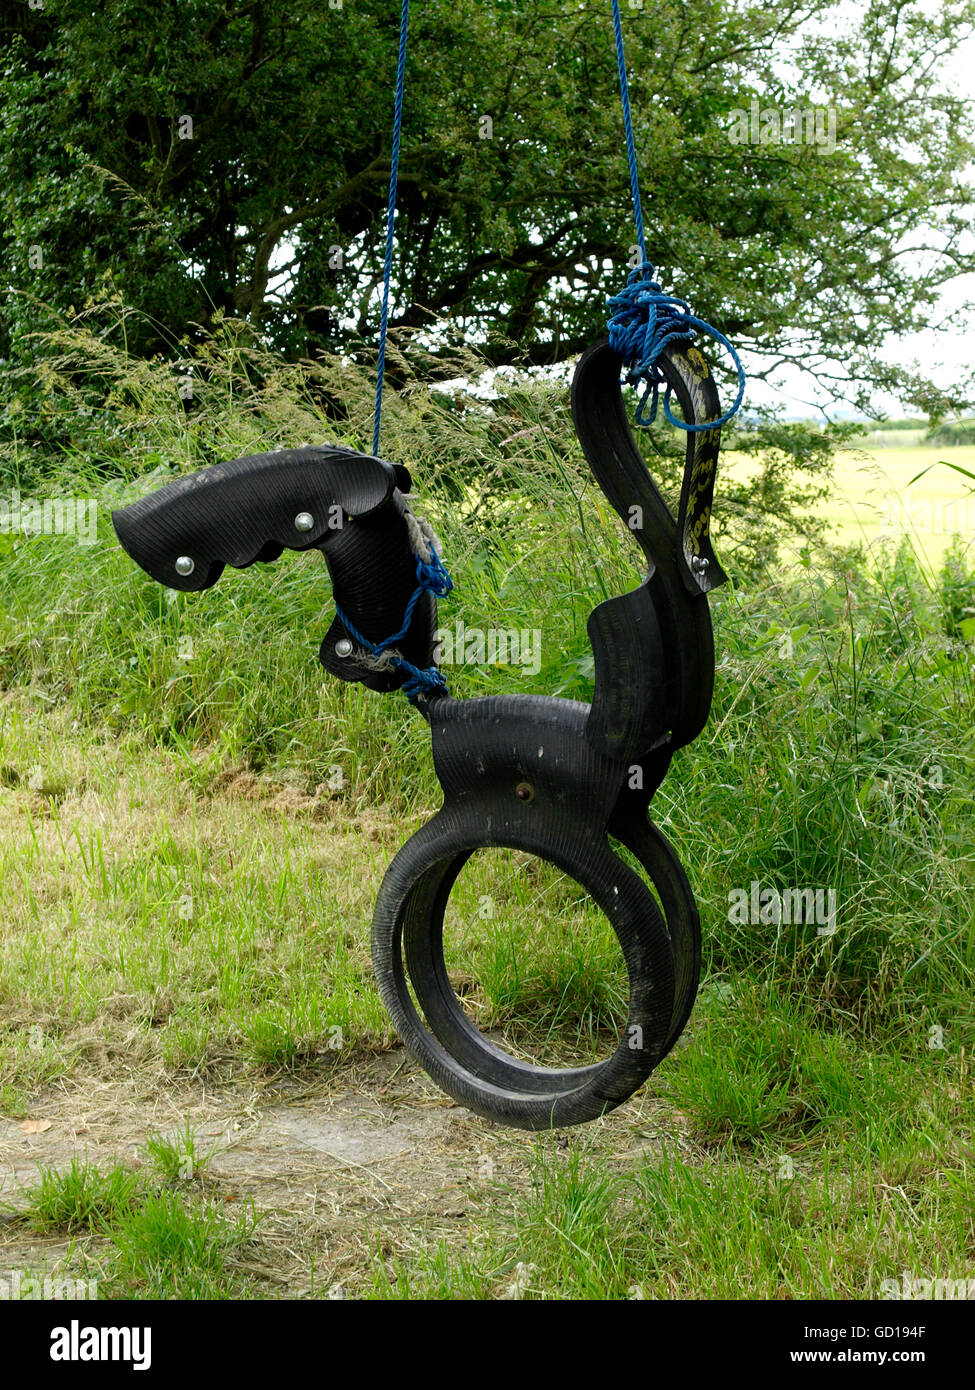 Horse shaped swing made from recycled tires, UK Stock Photo